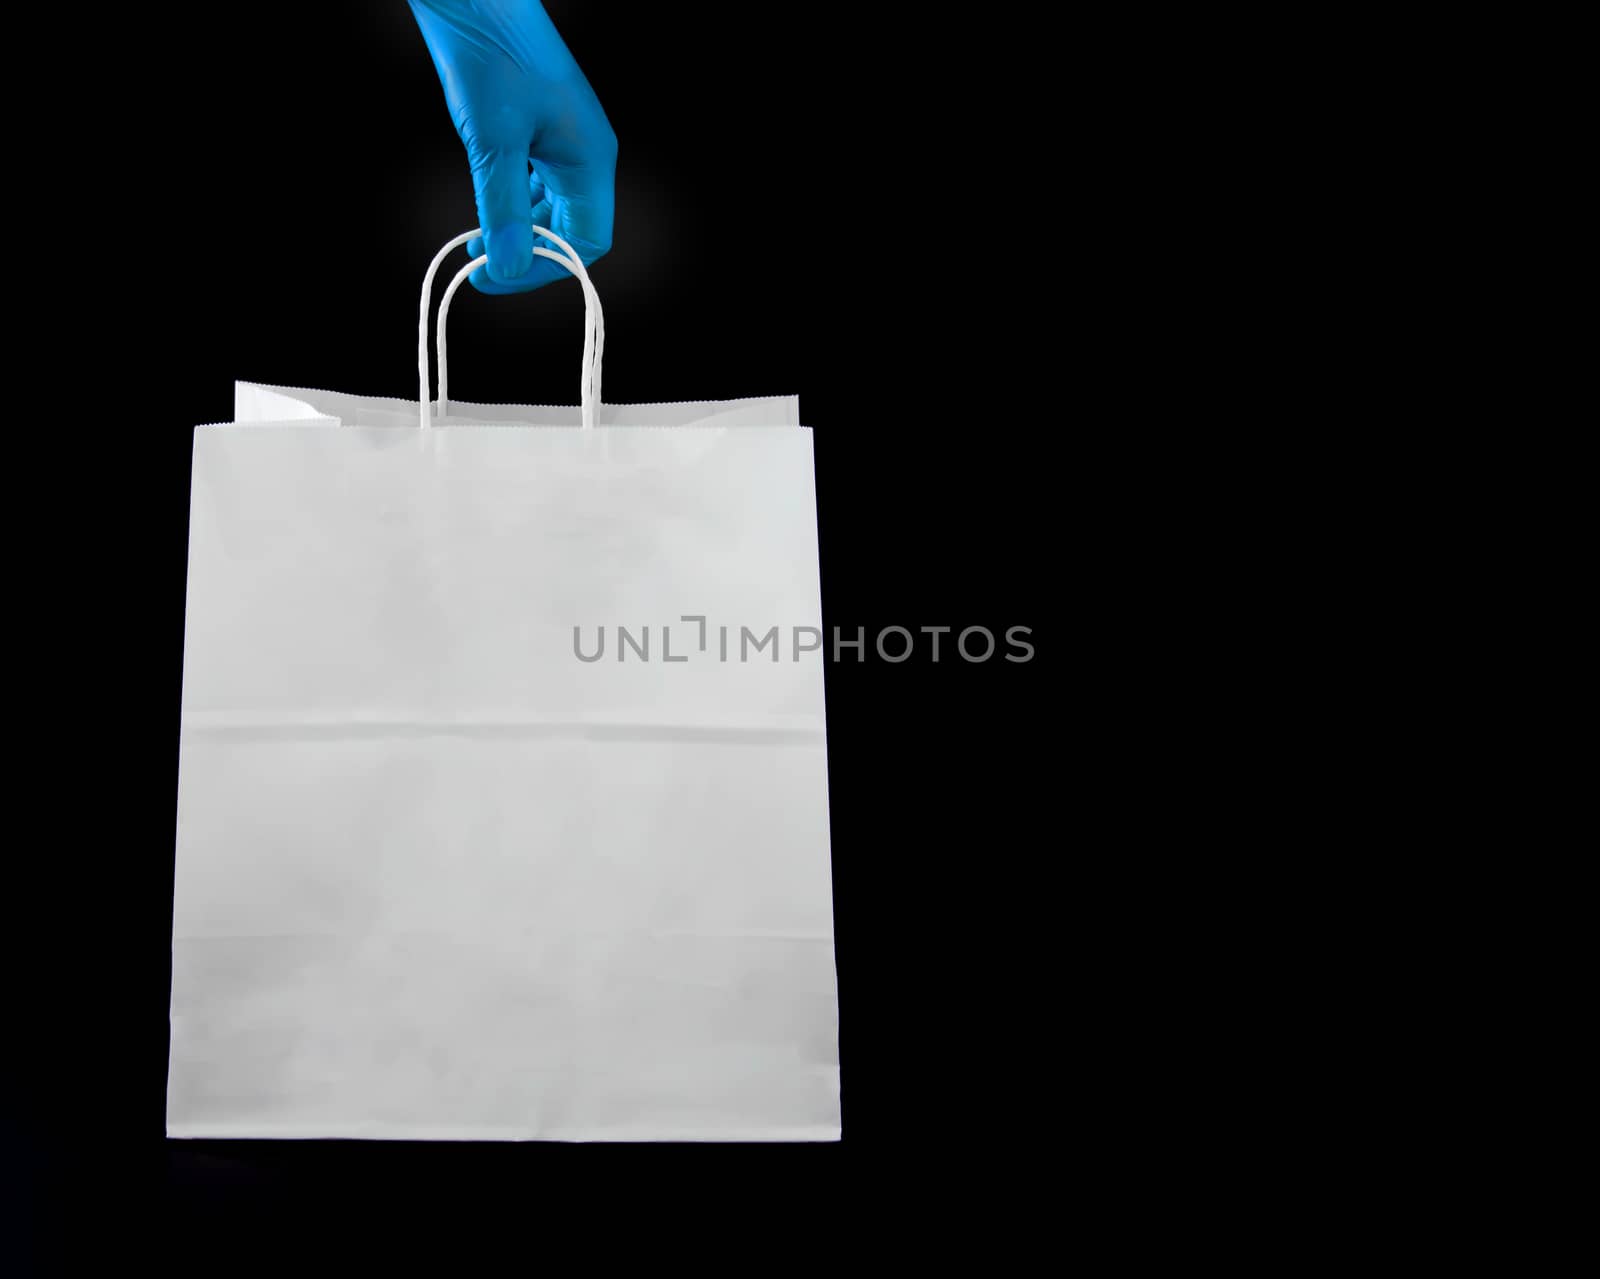 A person wearing protective latex gloves holding a shopping paper bag